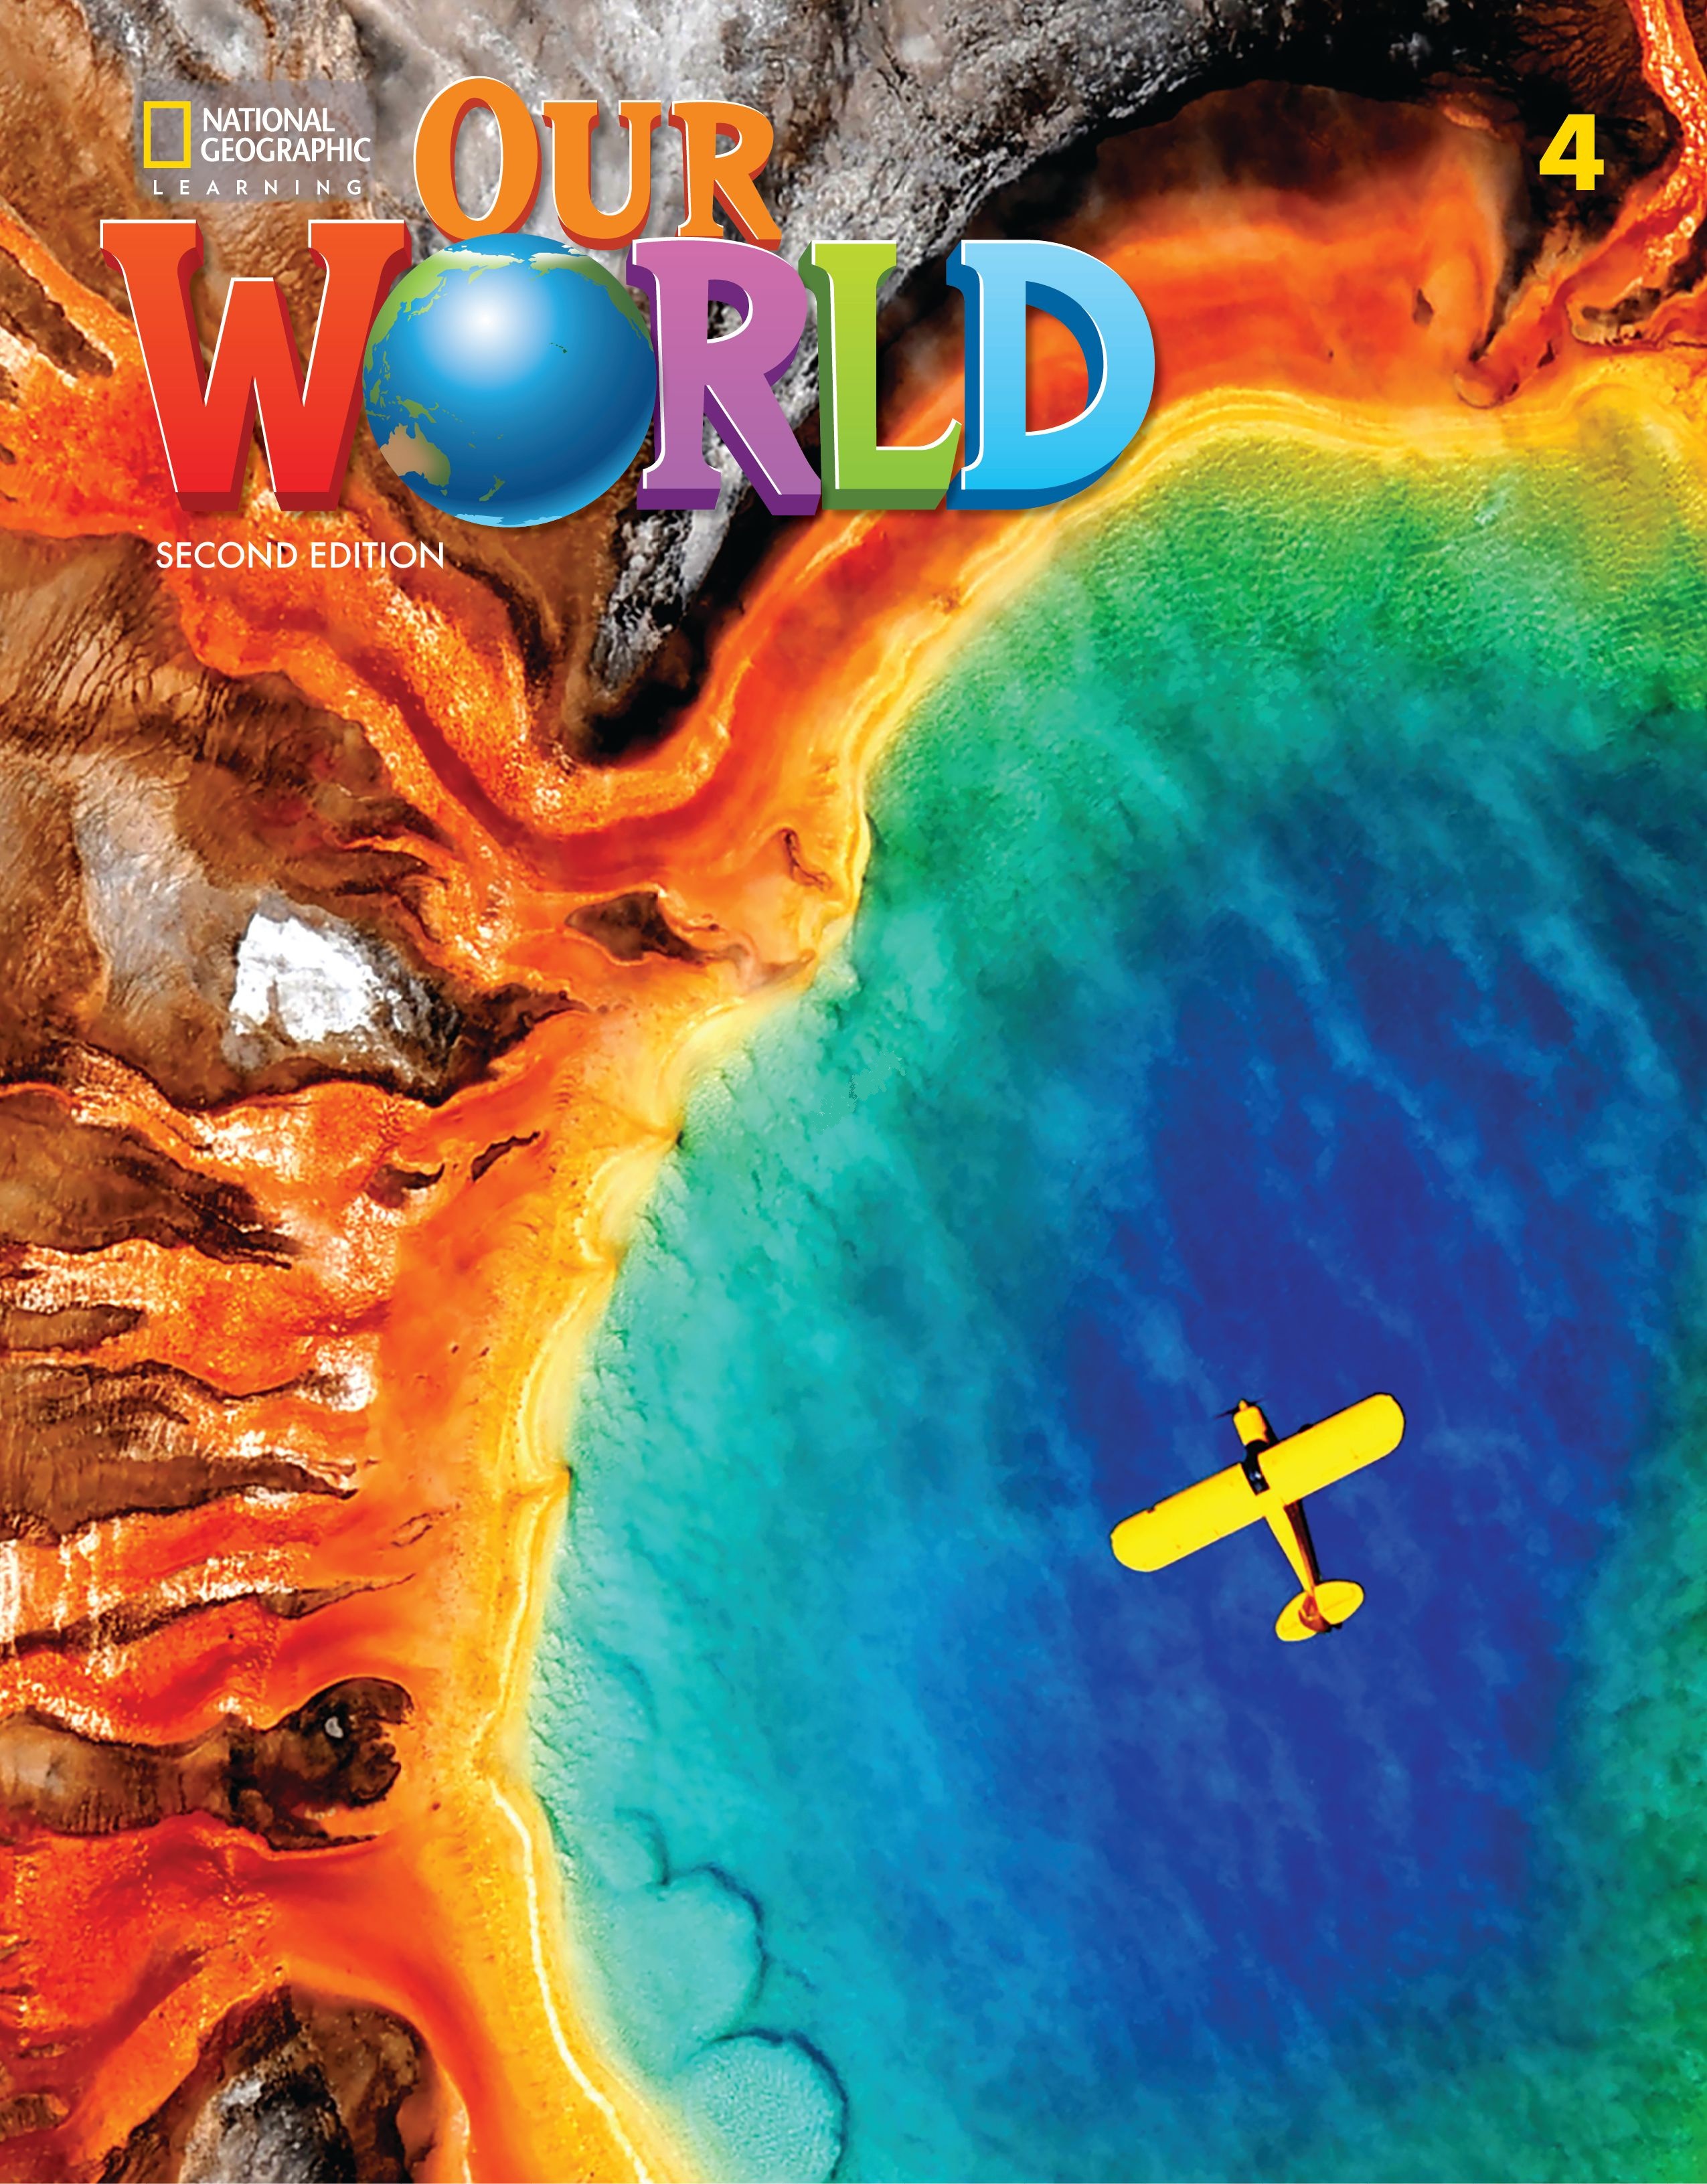 OUR WORLD 2nd ED 4 Student's Book